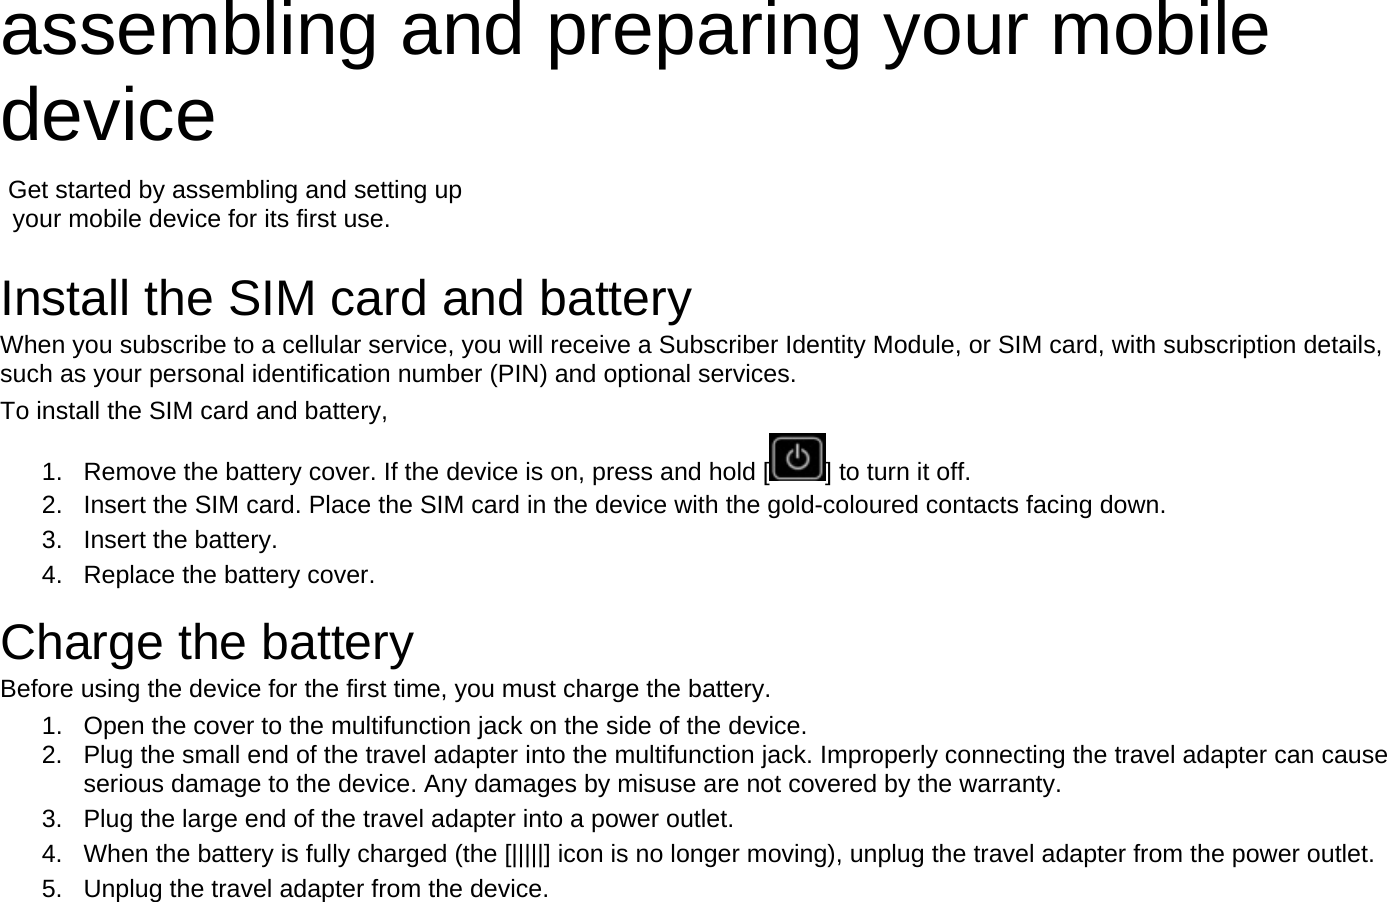 assembling and preparing your mobile device   Get started by assembling and setting up     your mobile device for its first use.  Install the SIM card and battery When you subscribe to a cellular service, you will receive a Subscriber Identity Module, or SIM card, with subscription details, such as your personal identification number (PIN) and optional services. To install the SIM card and battery, 1.  Remove the battery cover. If the device is on, press and hold [ ] to turn it off. 2.  Insert the SIM card. Place the SIM card in the device with the gold-coloured contacts facing down. 3. Insert the battery. 4.  Replace the battery cover.  Charge the battery Before using the device for the first time, you must charge the battery. 1.  Open the cover to the multifunction jack on the side of the device. 2.  Plug the small end of the travel adapter into the multifunction jack. Improperly connecting the travel adapter can cause serious damage to the device. Any damages by misuse are not covered by the warranty. 3.  Plug the large end of the travel adapter into a power outlet. 4.  When the battery is fully charged (the [|||||] icon is no longer moving), unplug the travel adapter from the power outlet. 5.  Unplug the travel adapter from the device. 